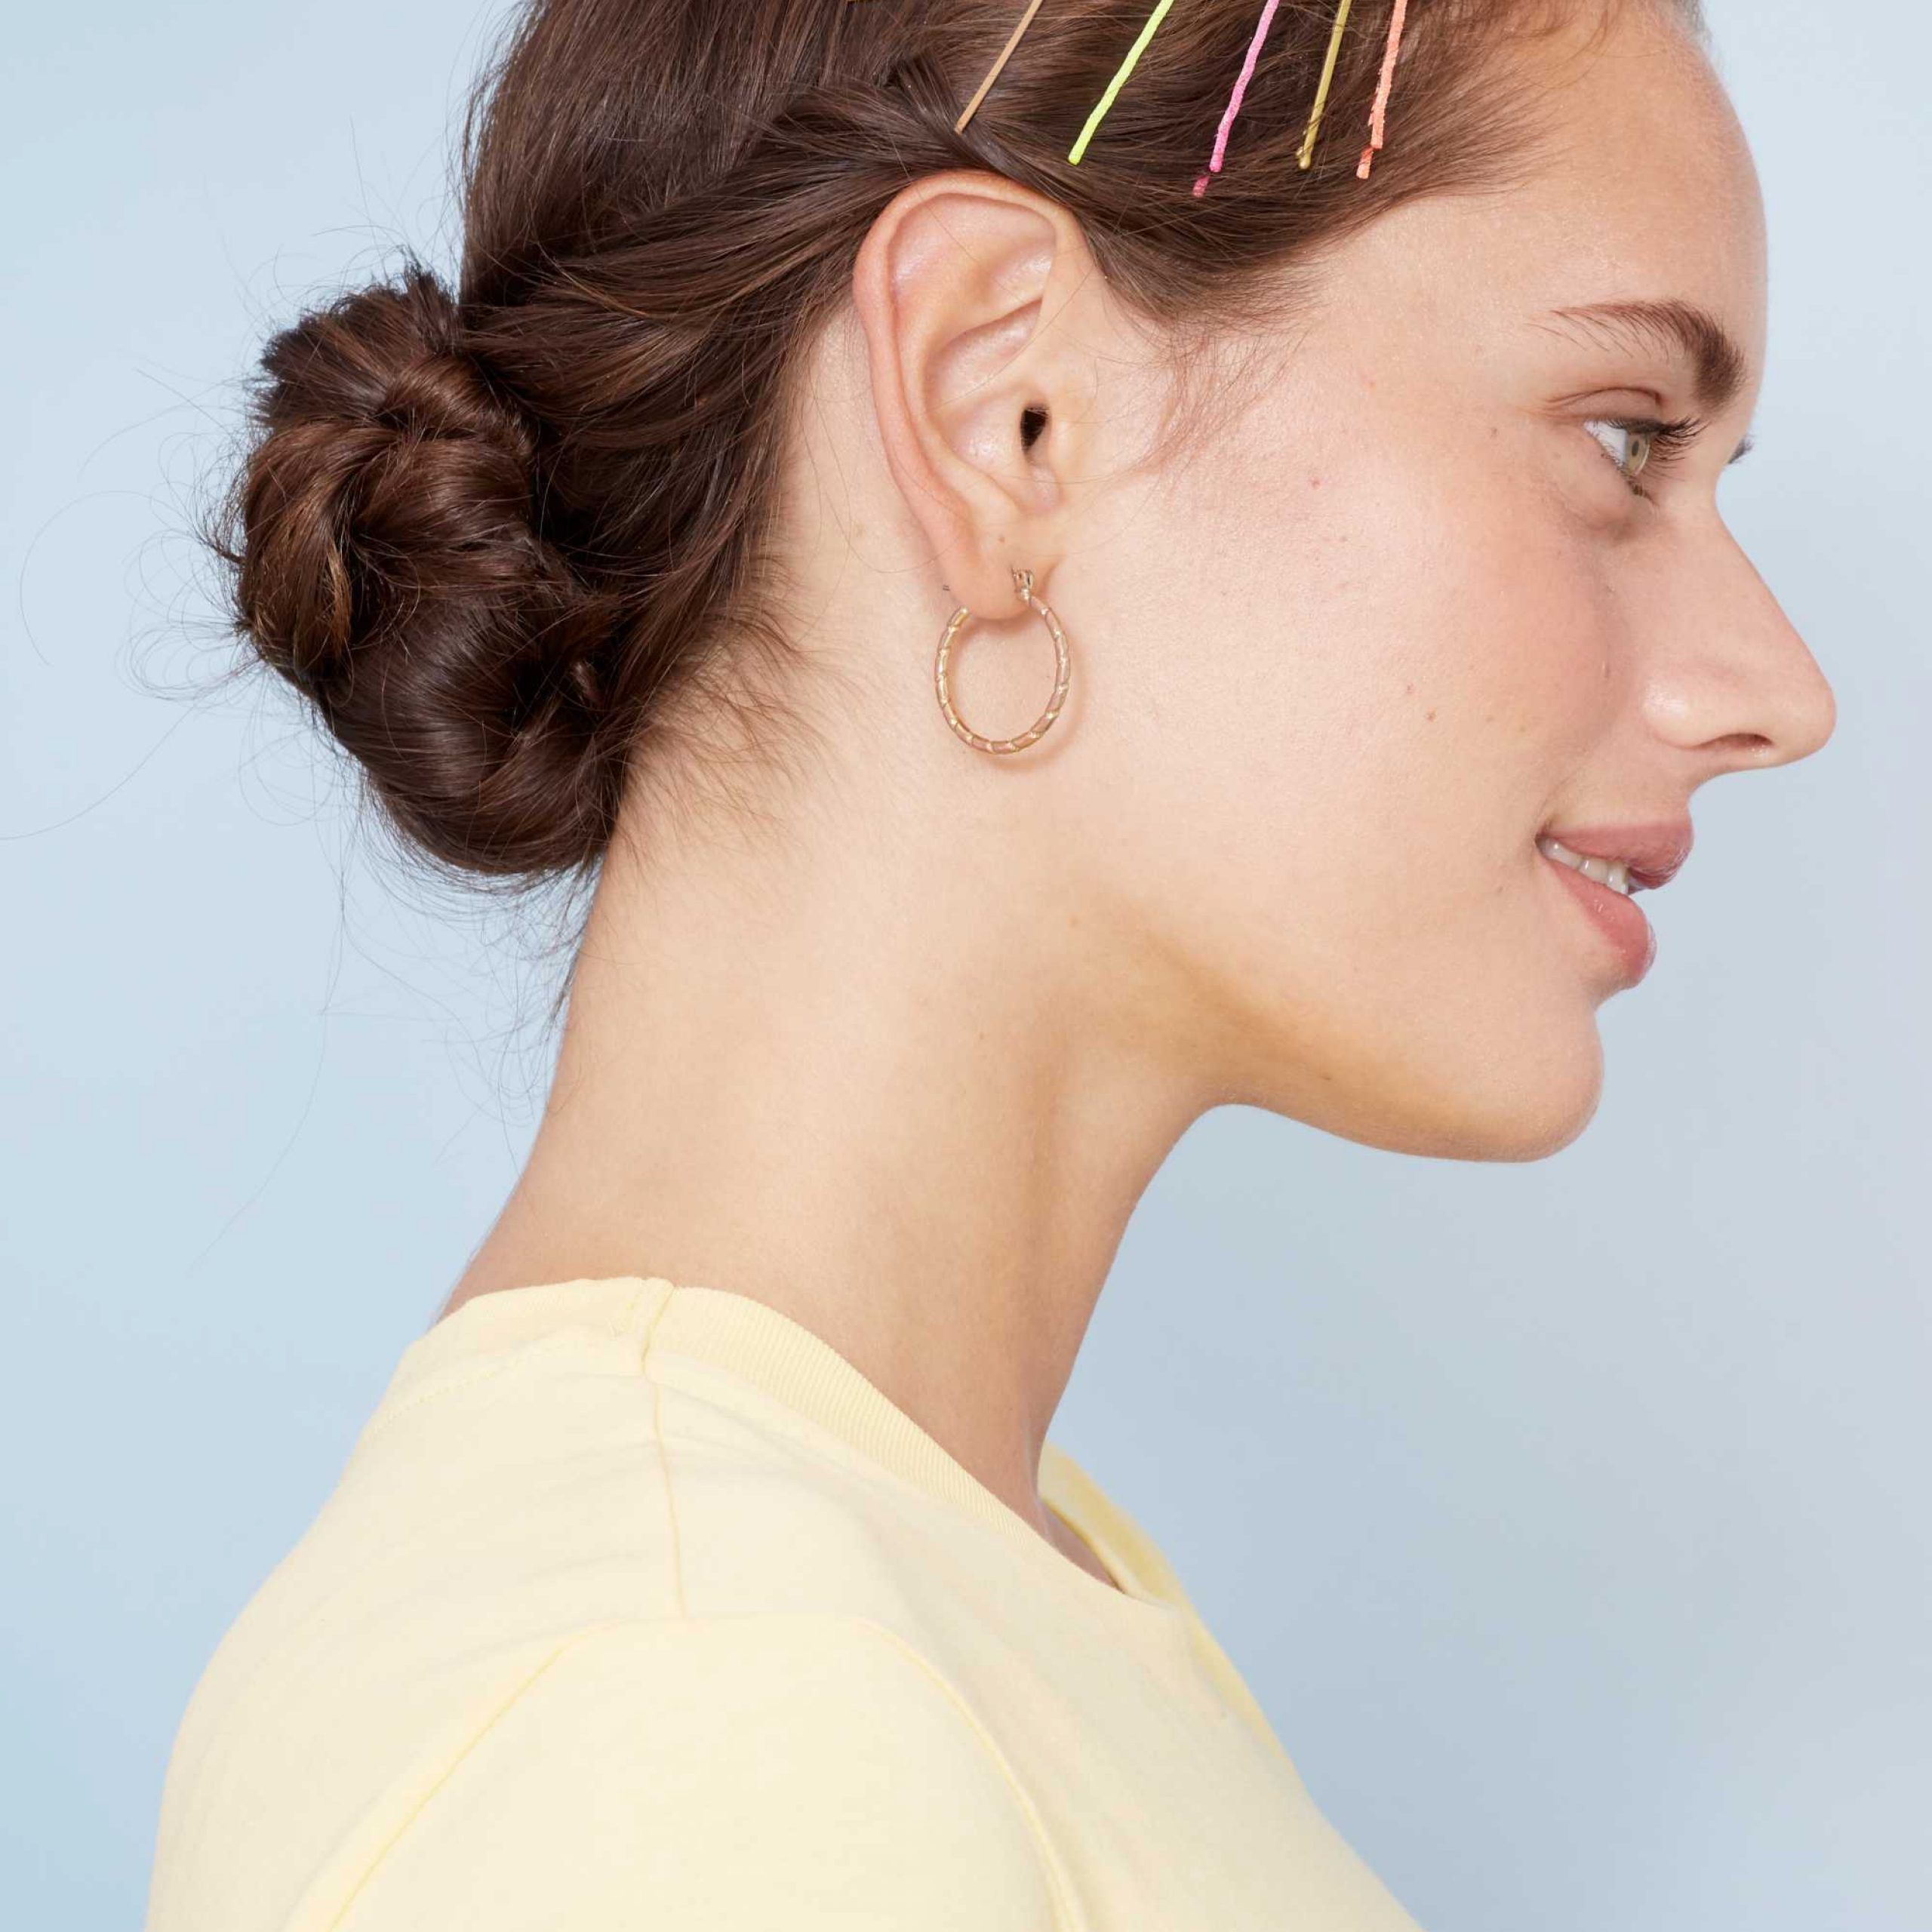 12 Cool Bobby Pin Hairstyles To Add To Your Hair Routine Regarding Brush Up Hairstyles With Bobby Pins (View 16 of 25)